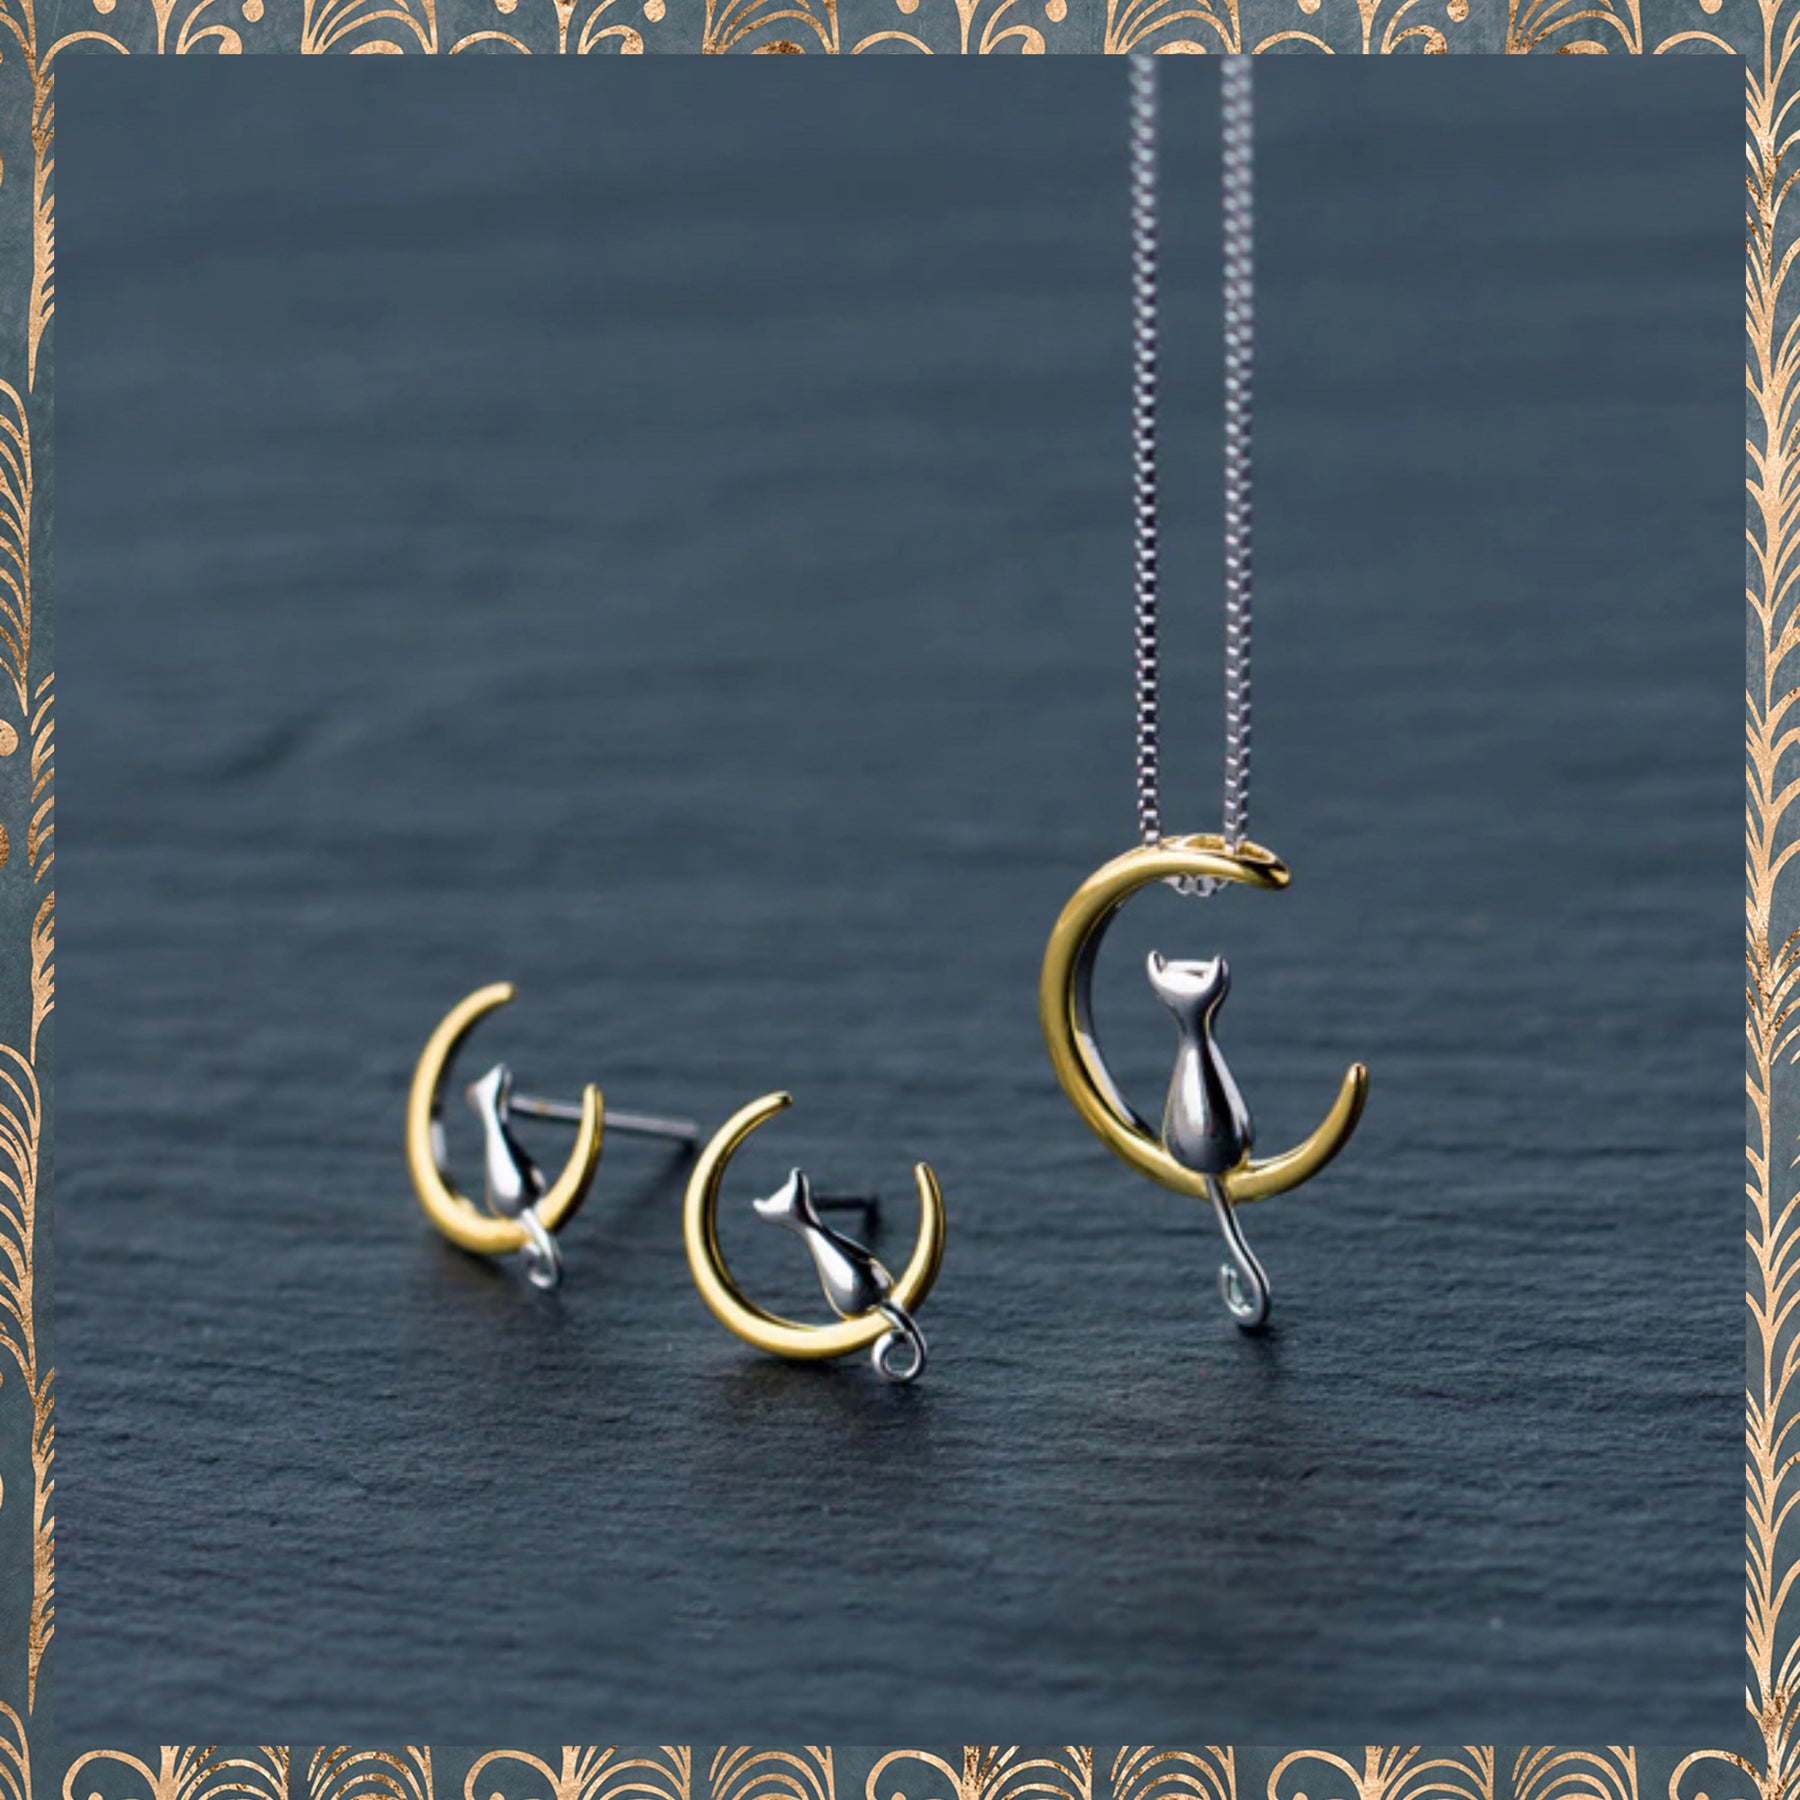 Gold and Silver Moon Kitty Set in Solid 925 Sterling Silver (smaller set)